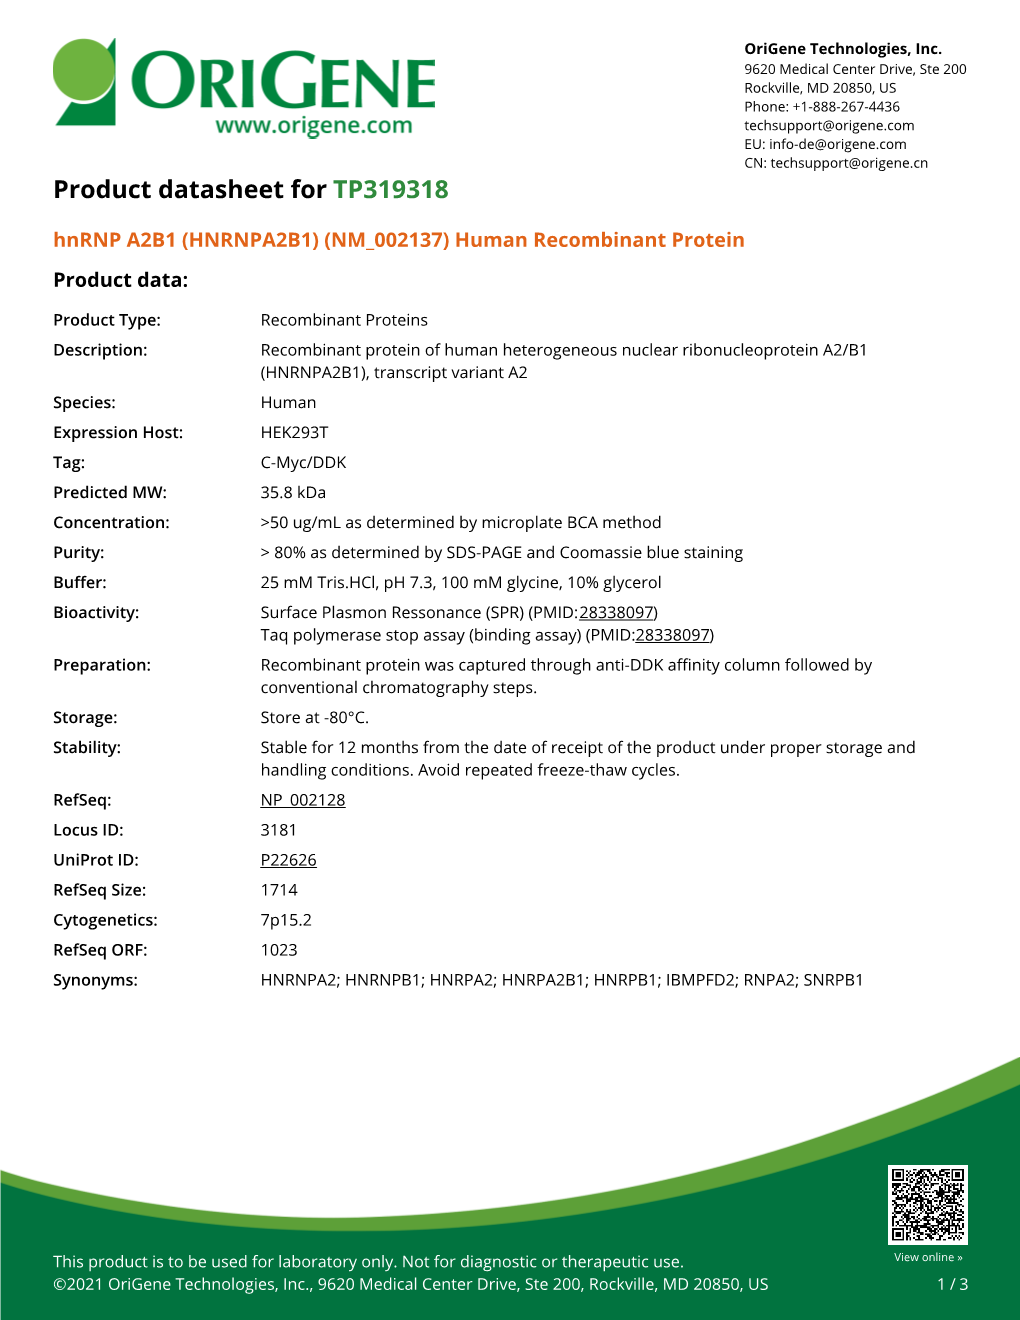 (HNRNPA2B1) (NM 002137) Human Recombinant Protein Product Data